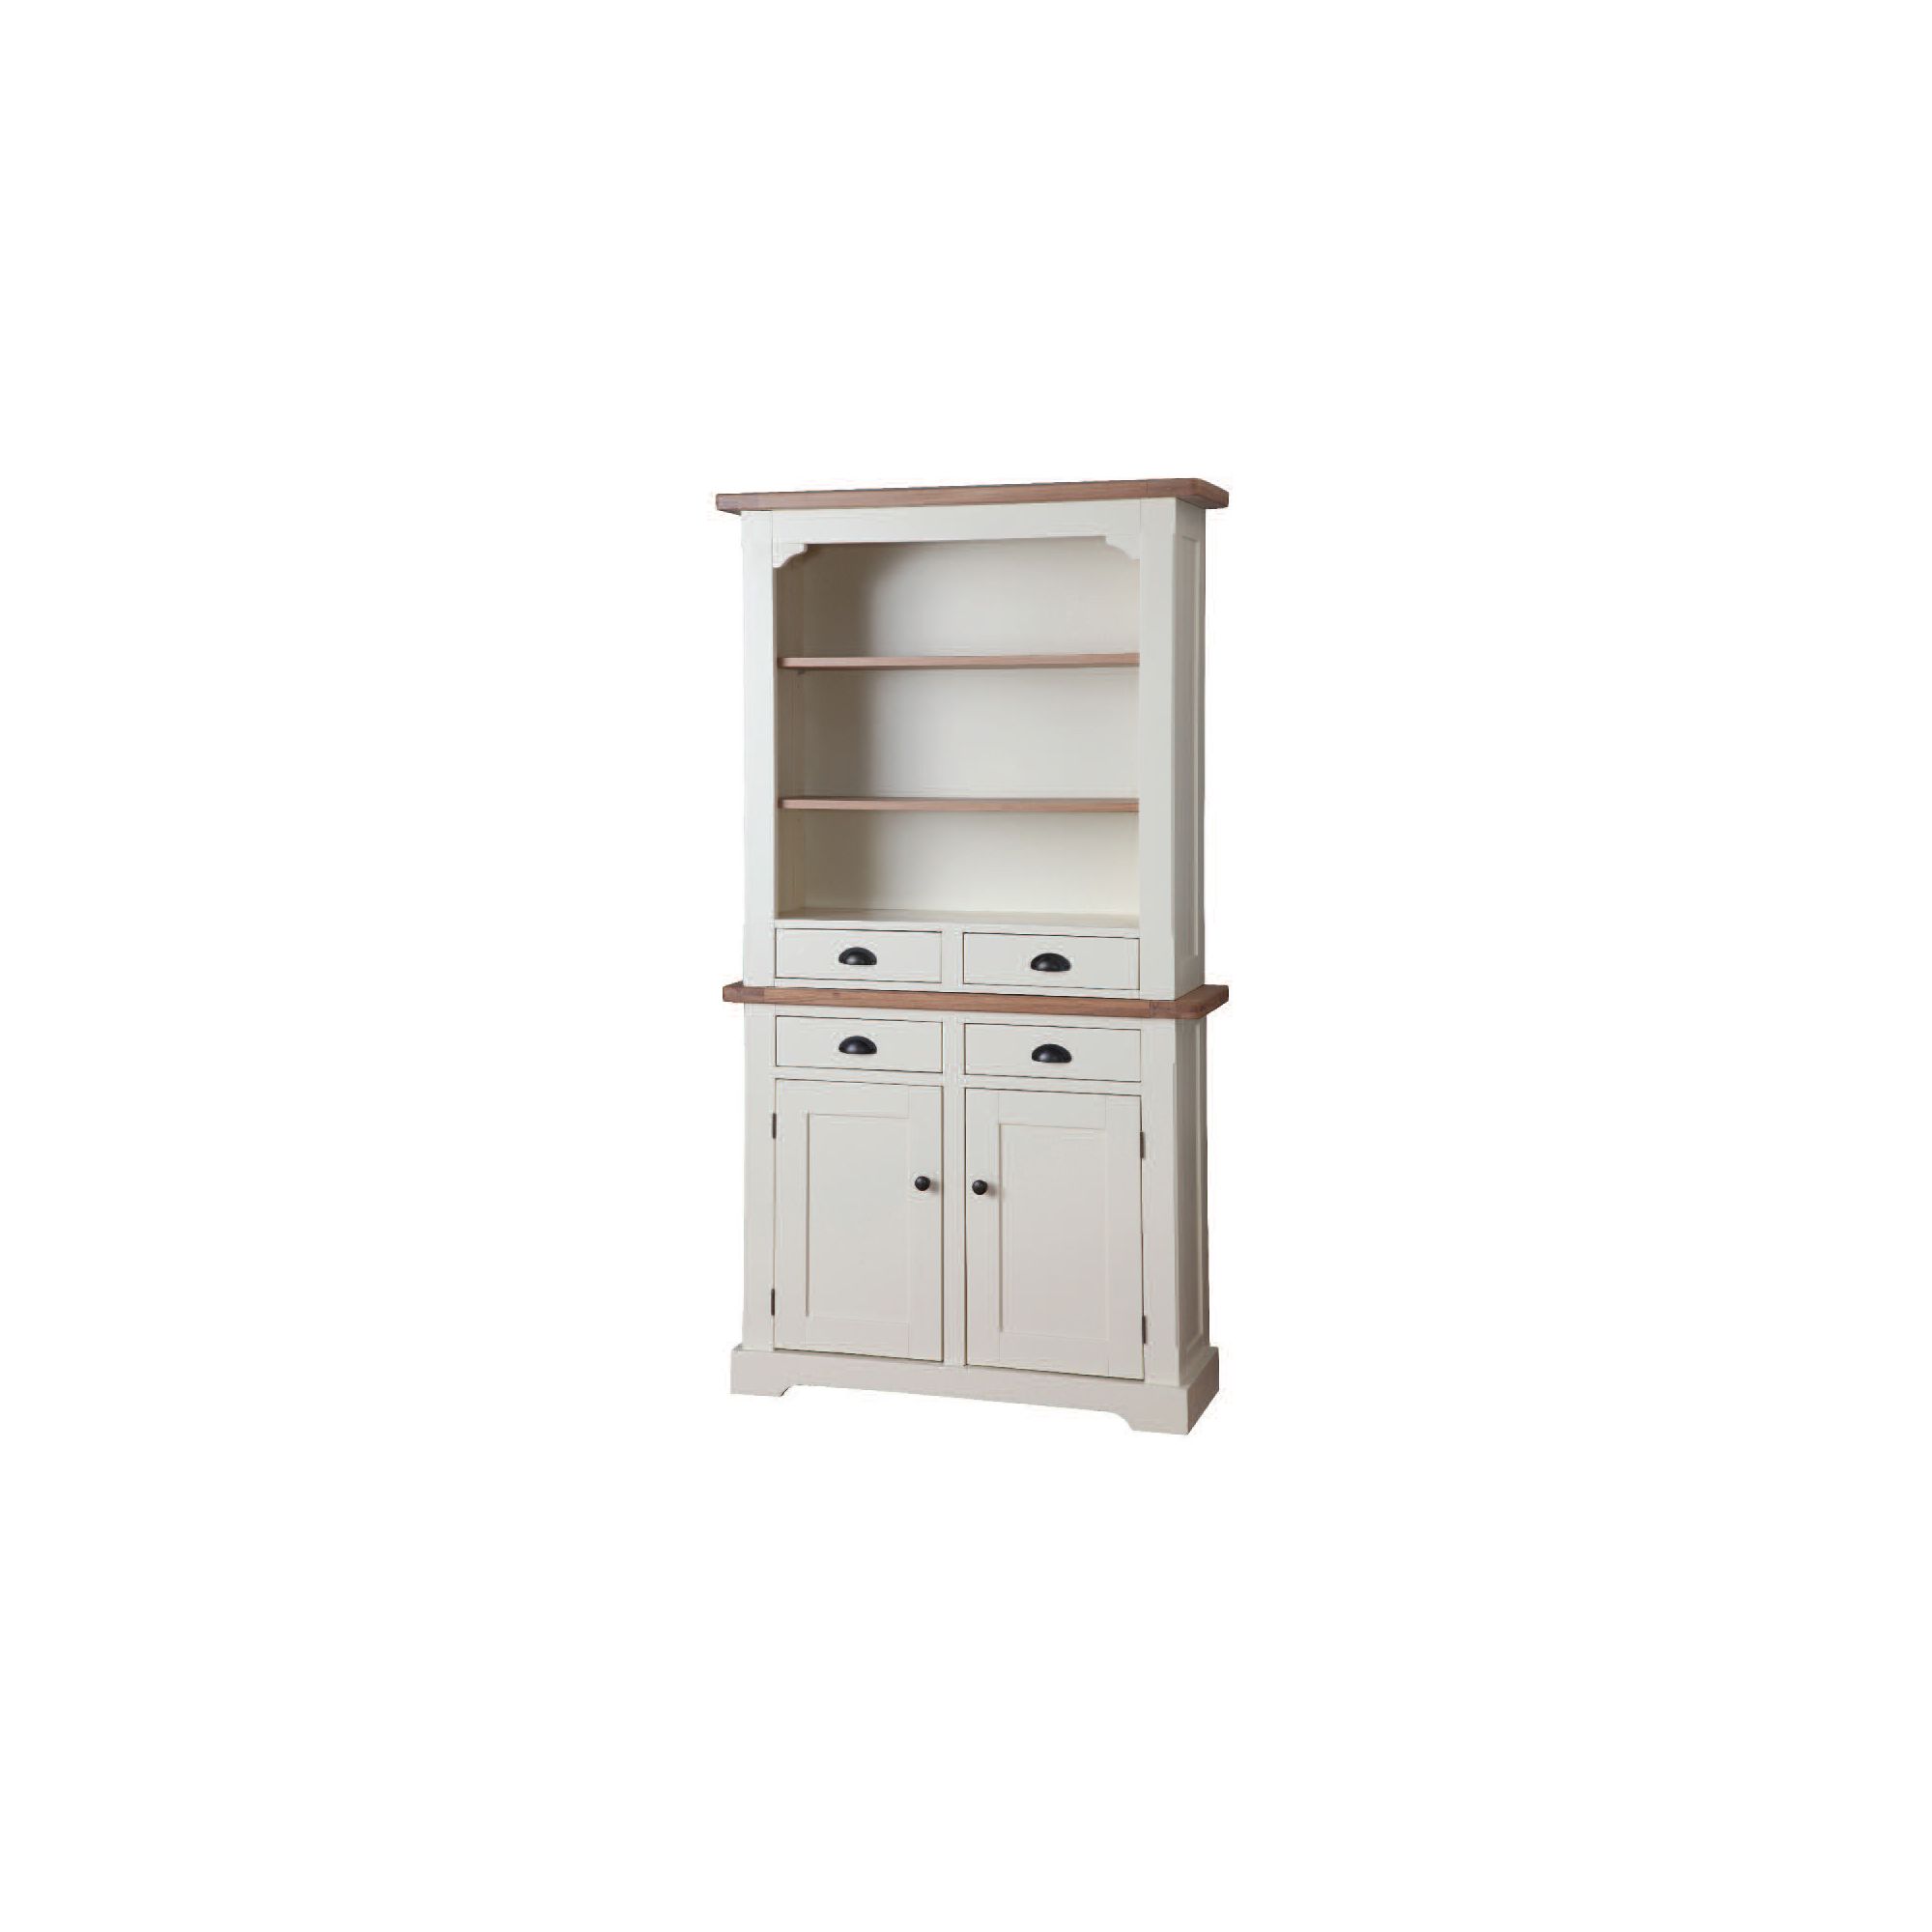 Wilkinson Furniture Buttermere Display Unit Top in Ivory at Tescos Direct